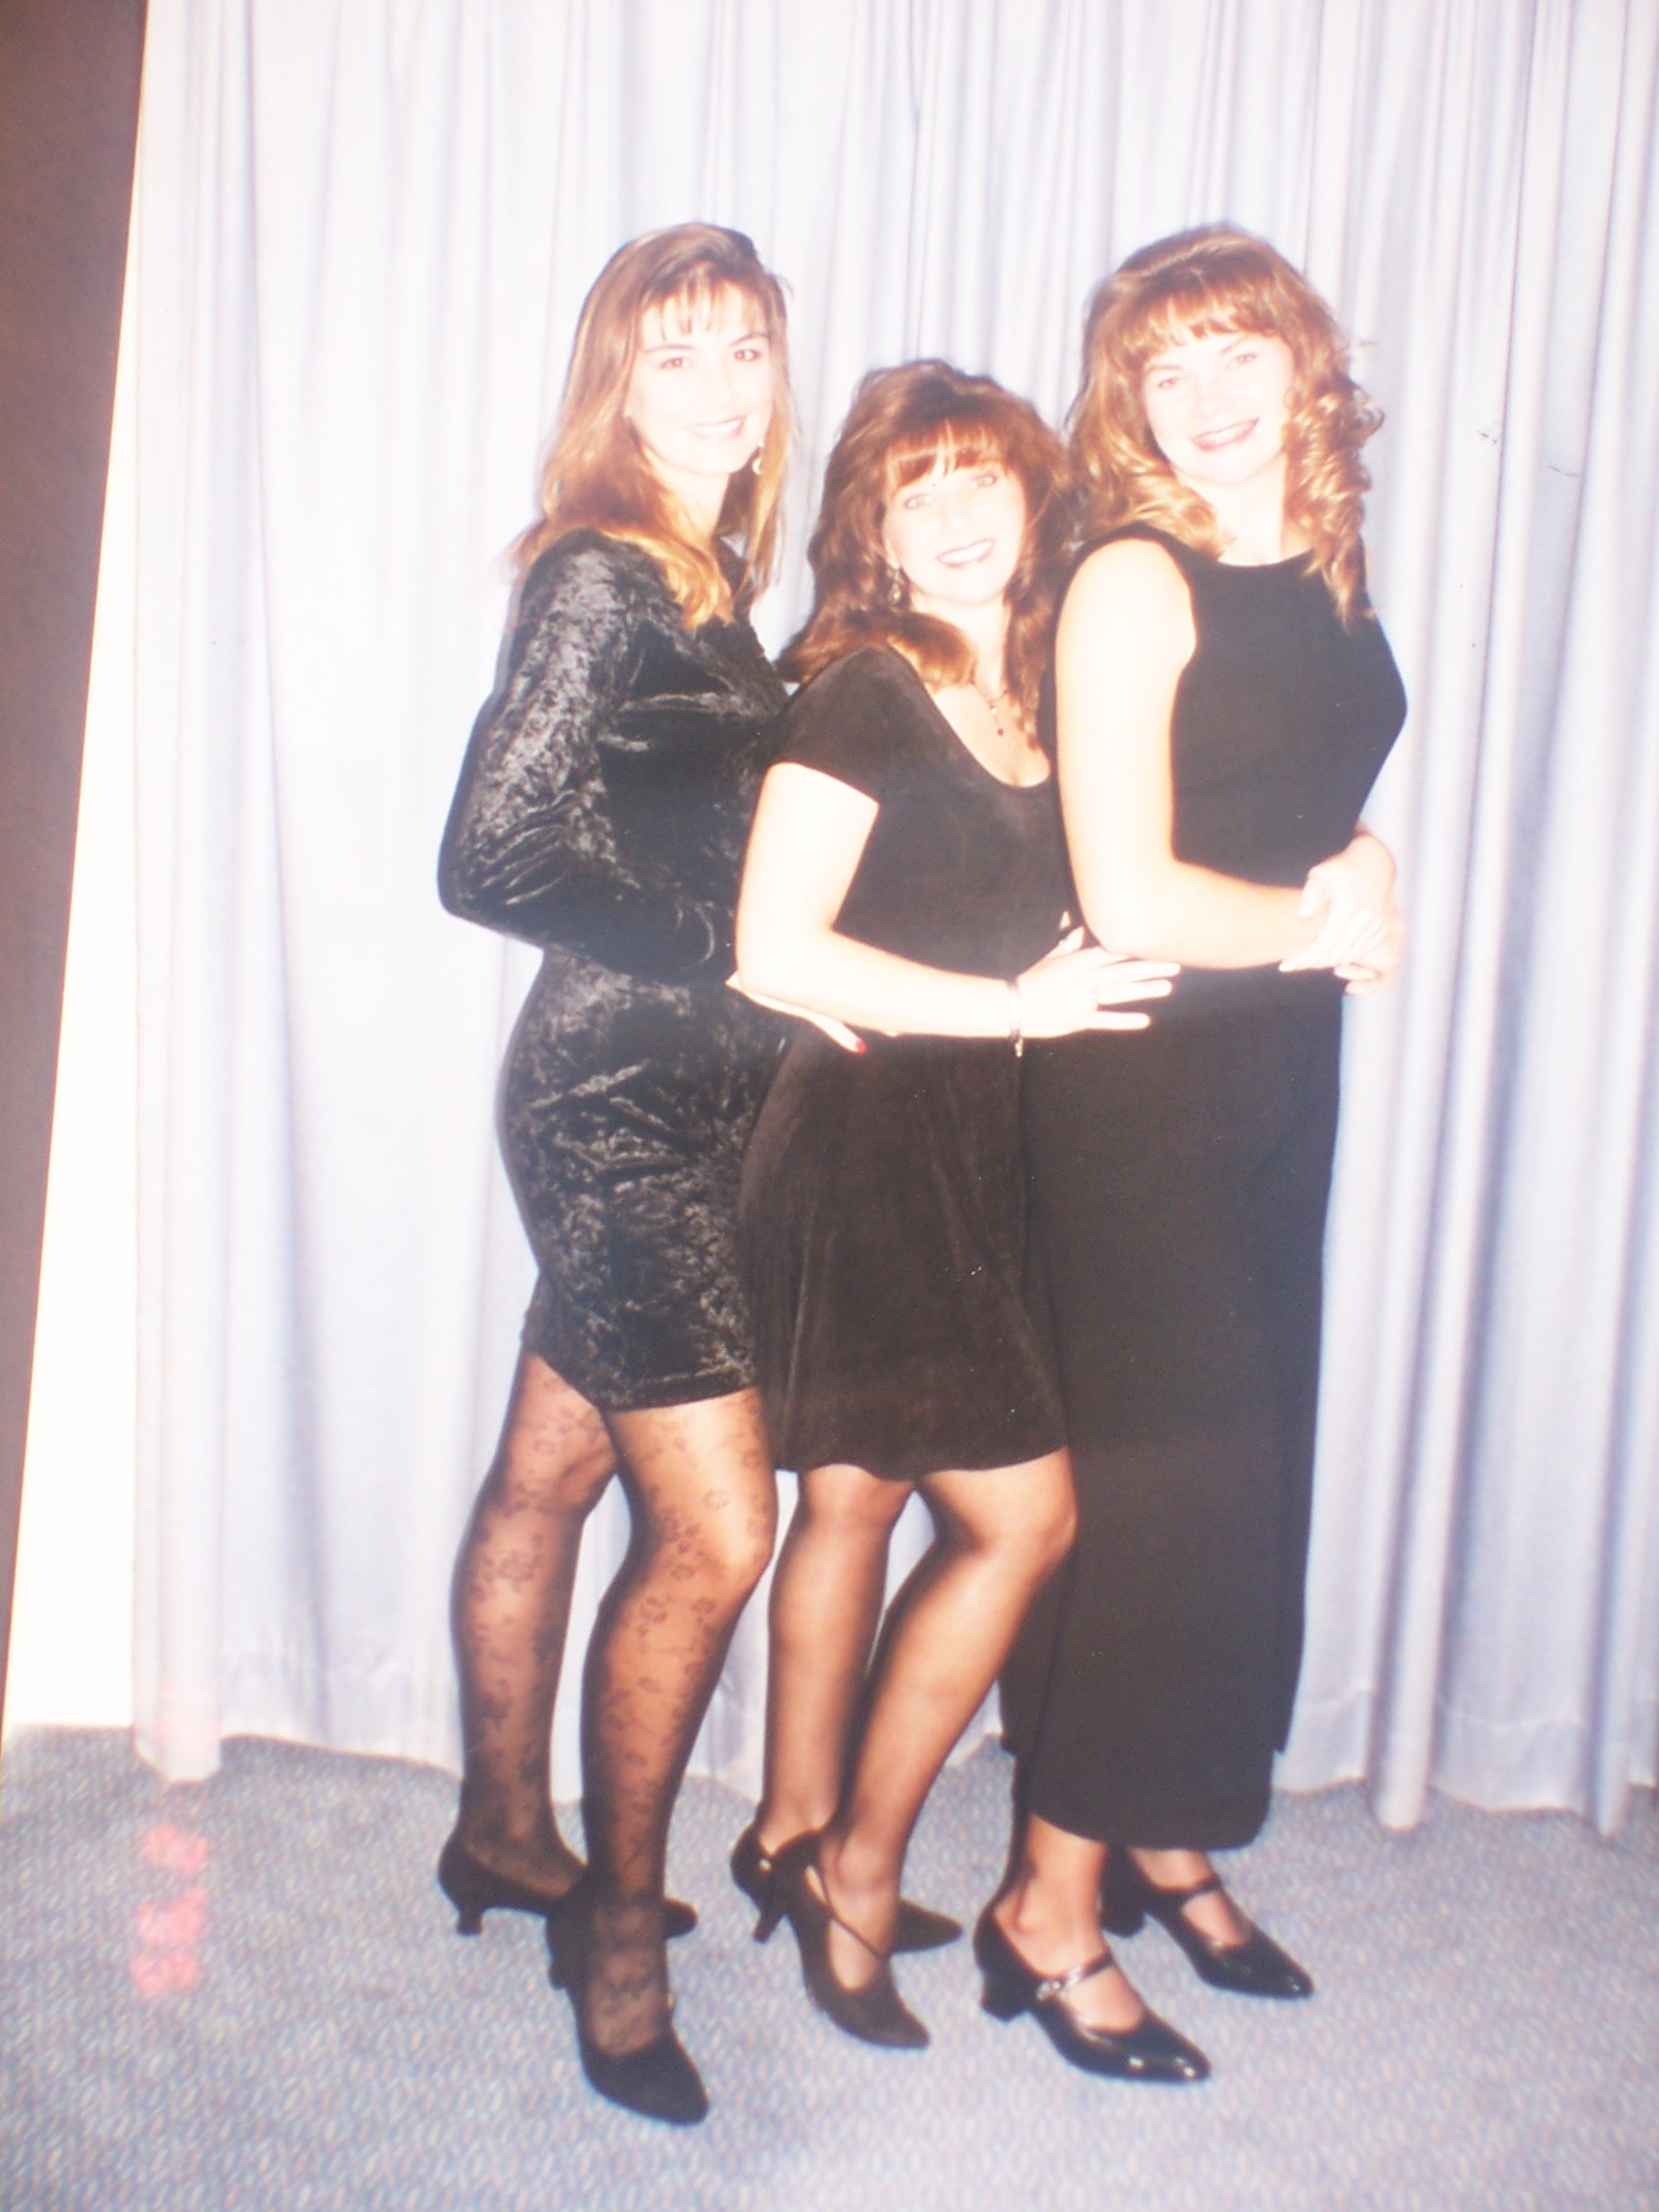 Kelly, Jamie, Amy 1995
One fine collection of San Onofre Ladies!
